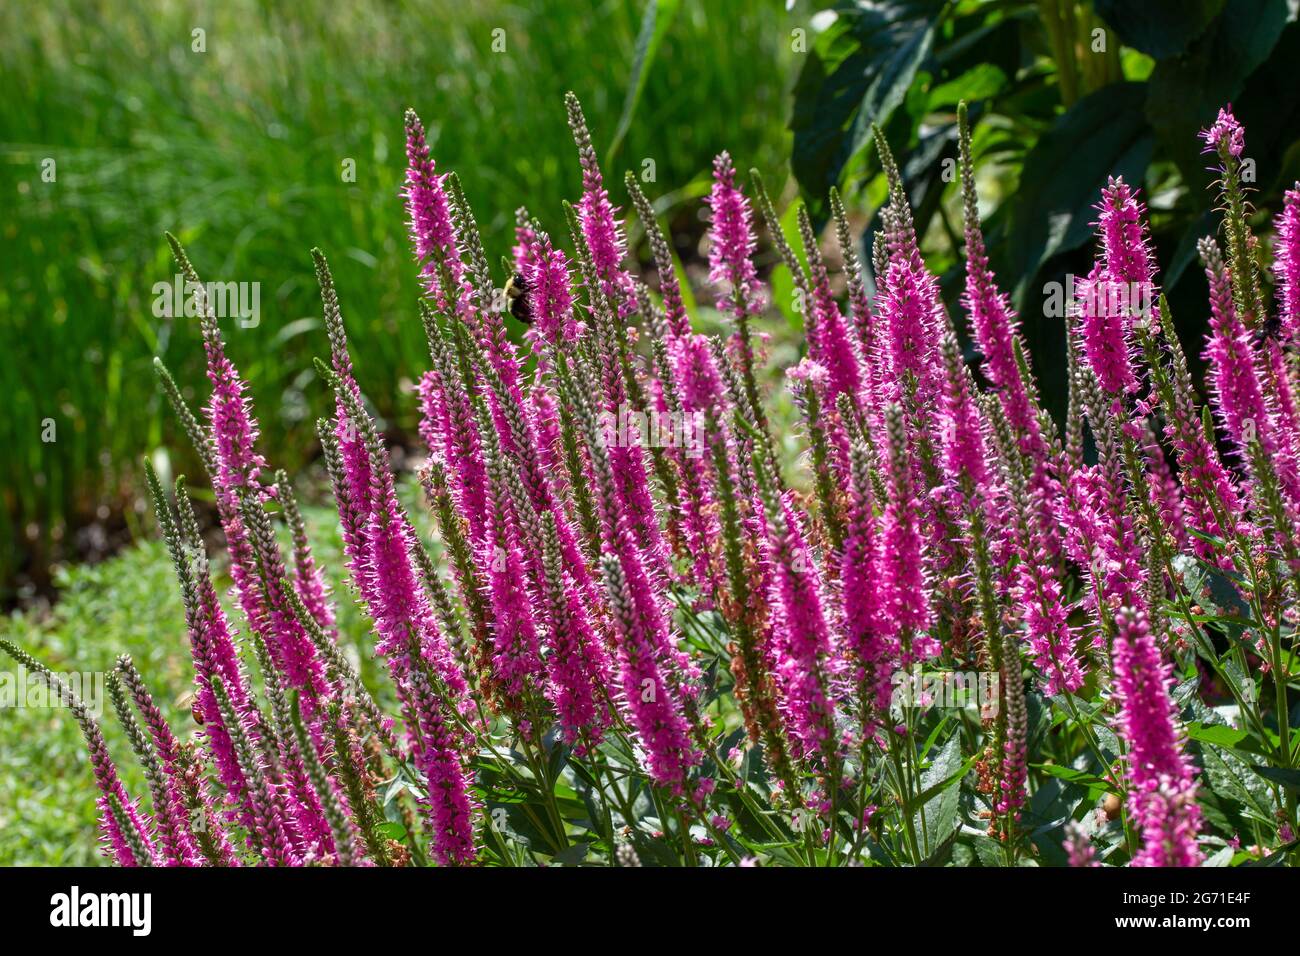 This image shows a close up texture landscape view of veronica spicata (spiked speedwell) flowers in bloom in a sunny ornamental garden. Stock Photo